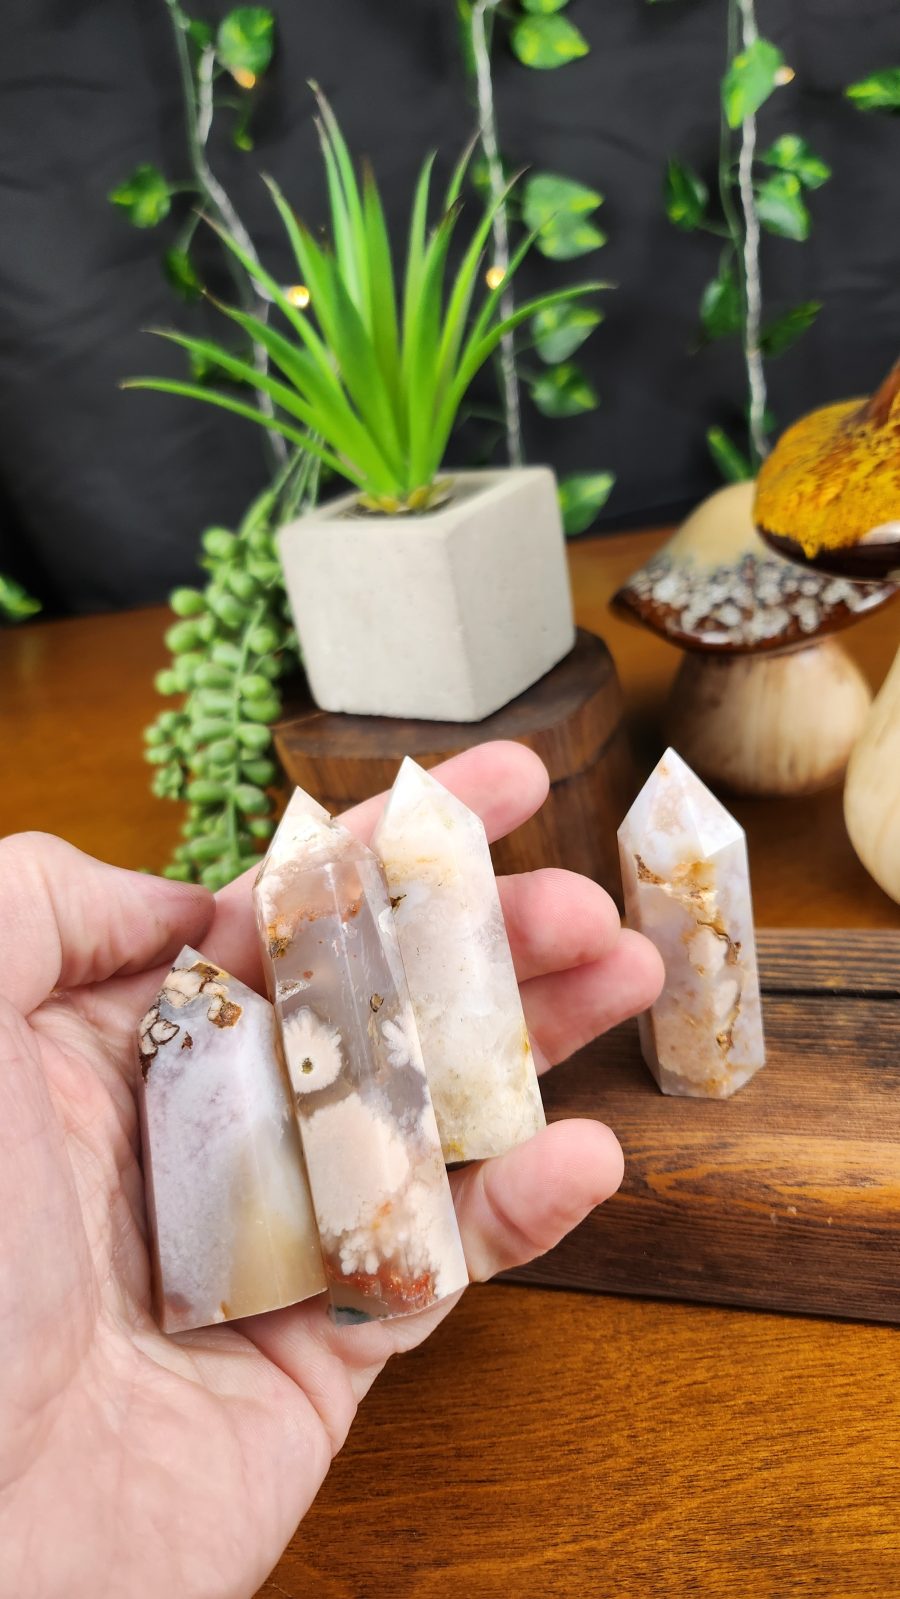 Flower Agate Crystal Points shown in hand for scale.